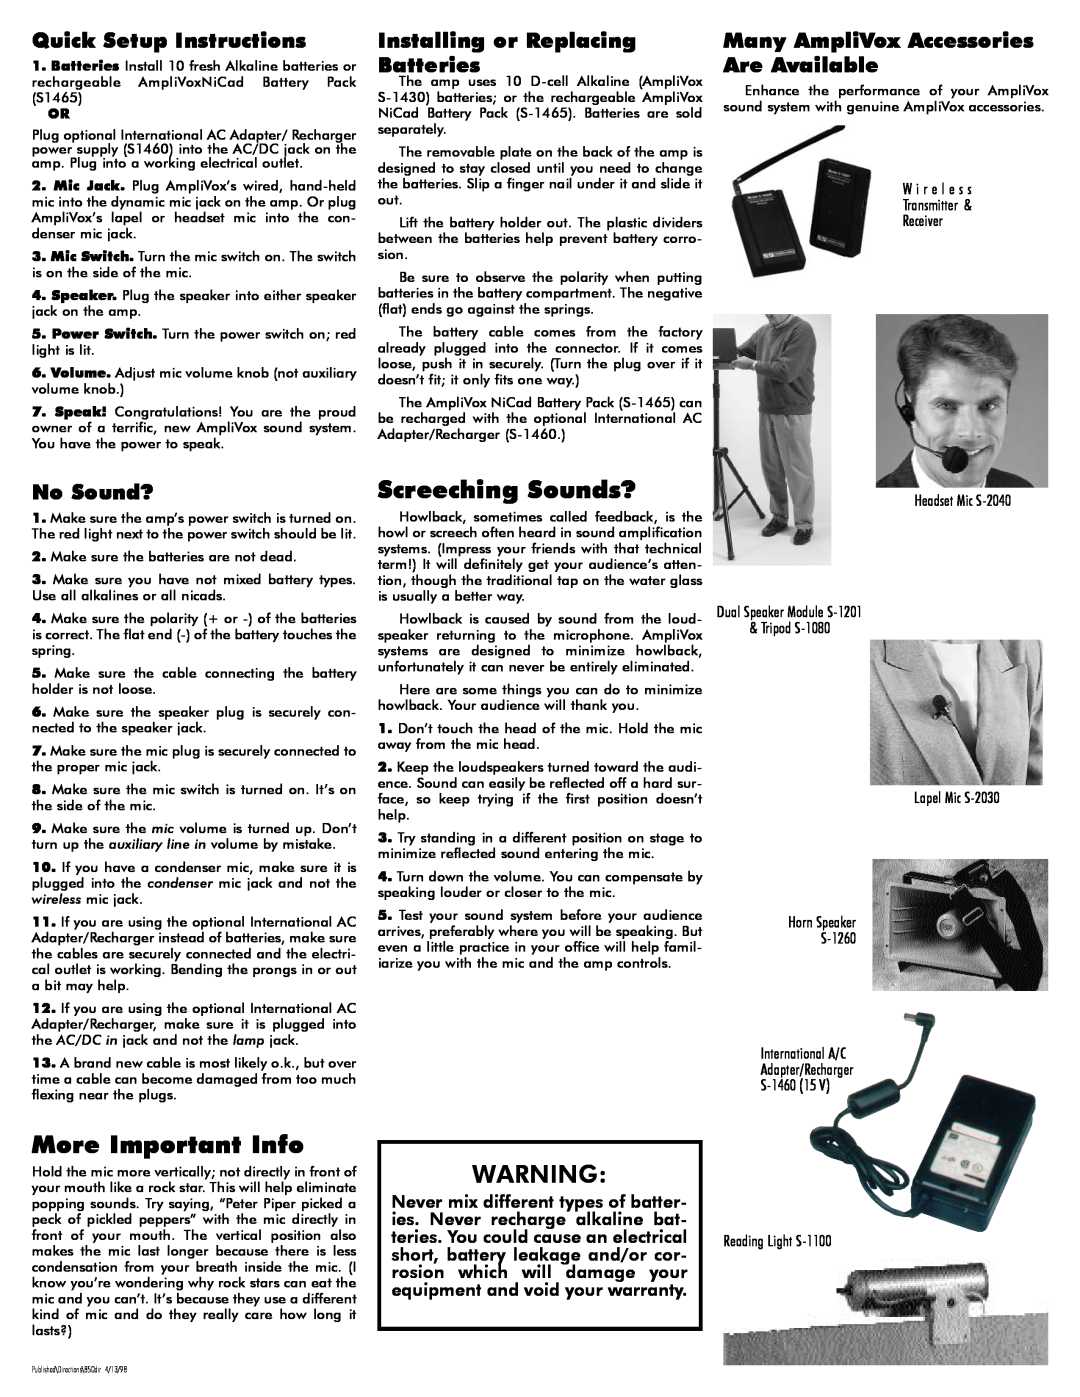 AmpliVox SW805A manual Quick Setup Instructions, Installing or Replacing Batteries, Many AmpliVox Accessories Are Available 